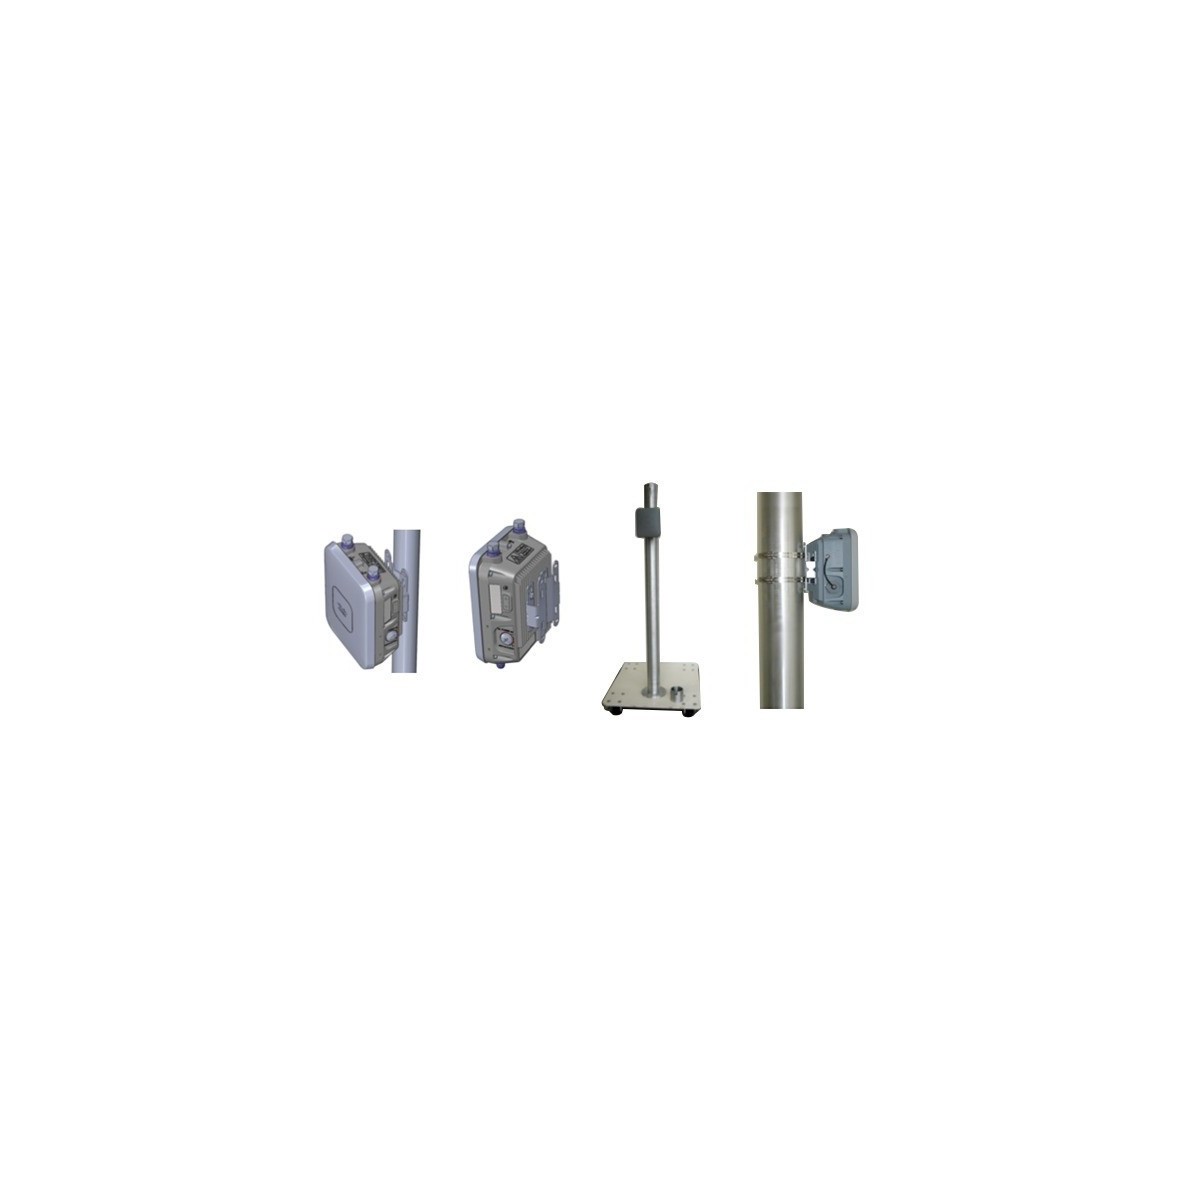 Standard Pole/Wall Mount Kit for AP1530 Series